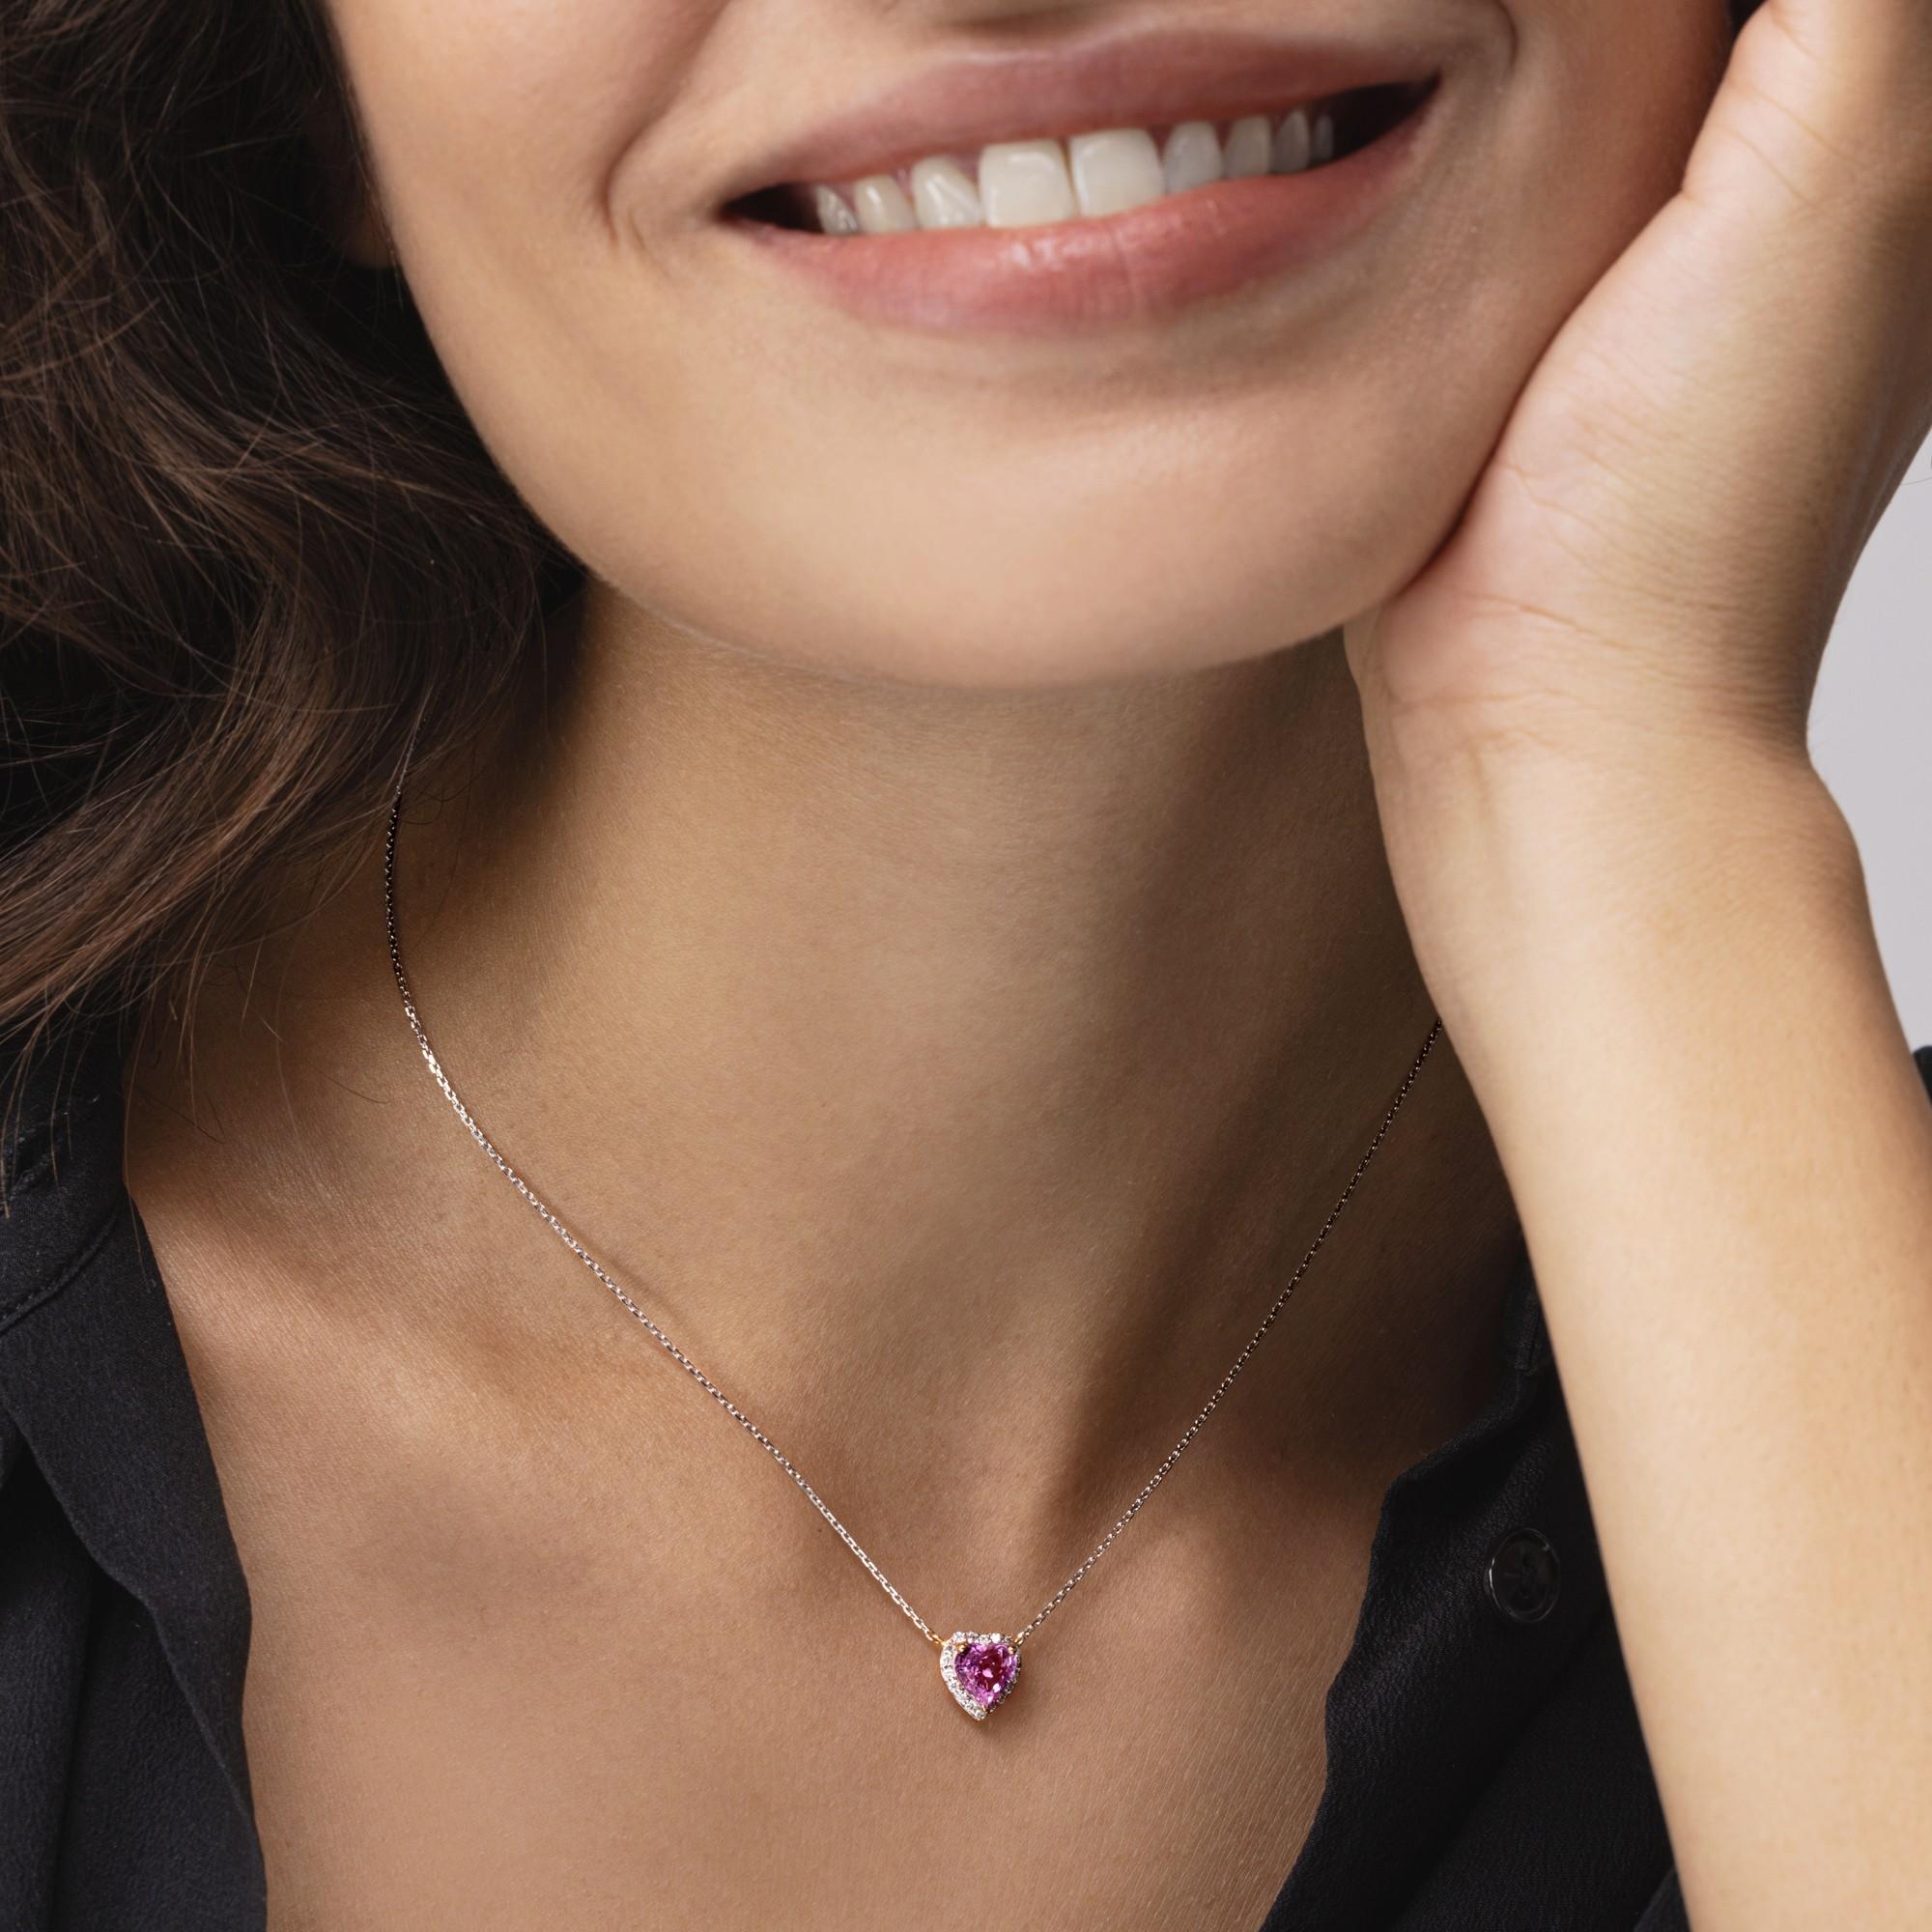 Alex Jona design collection, hand crafted in Italy, 18 karat rose gold pendant necklace suspending a heart cut pink sapphire weighing 1.11 carats in total, surrounded by 0.13 carats of white diamonds, F-G color, VS clarity.
Alex Jona jewels stand